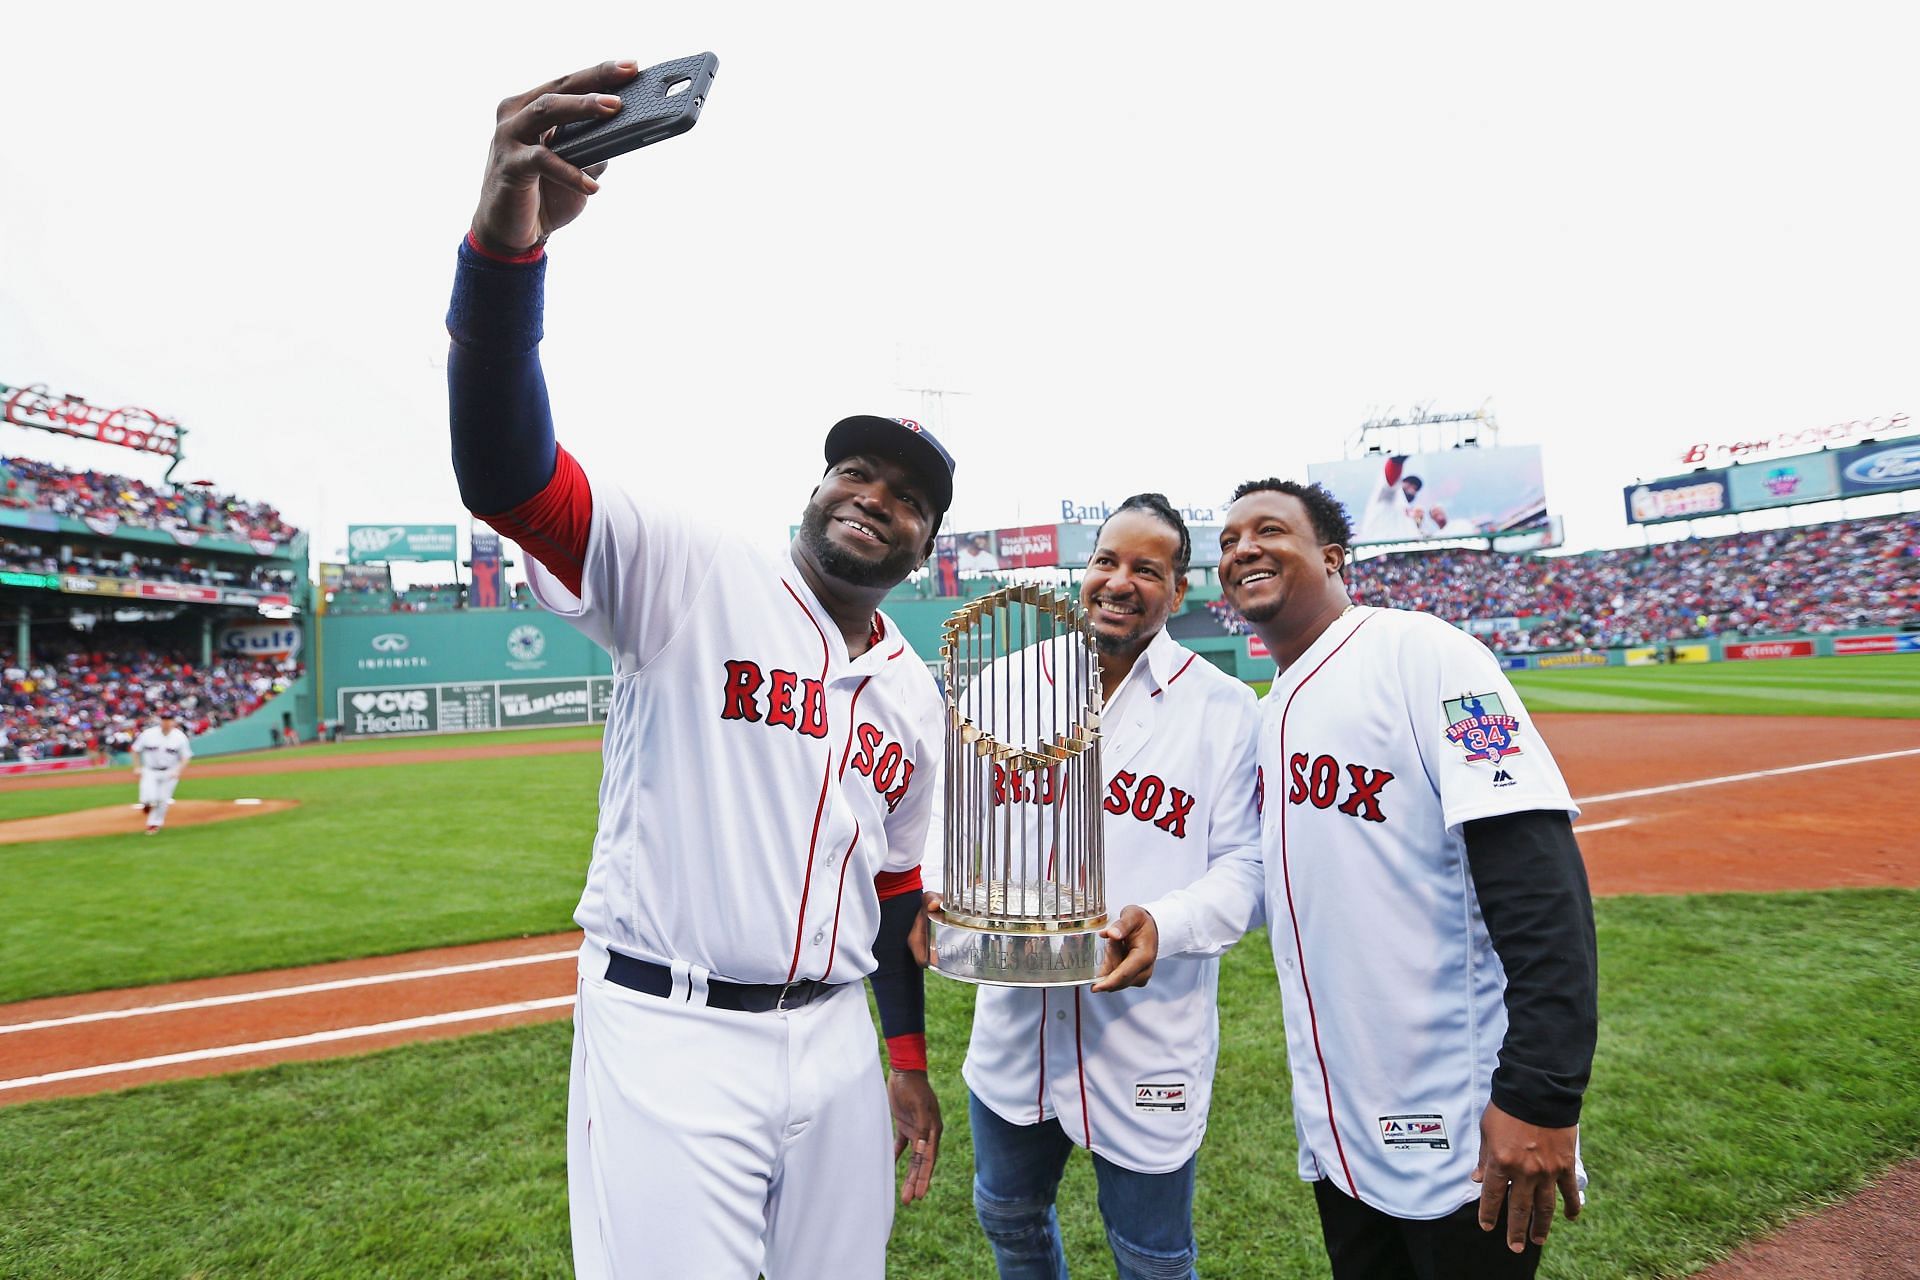 Manny Ramirez poses with the 2004 world championship trophy.